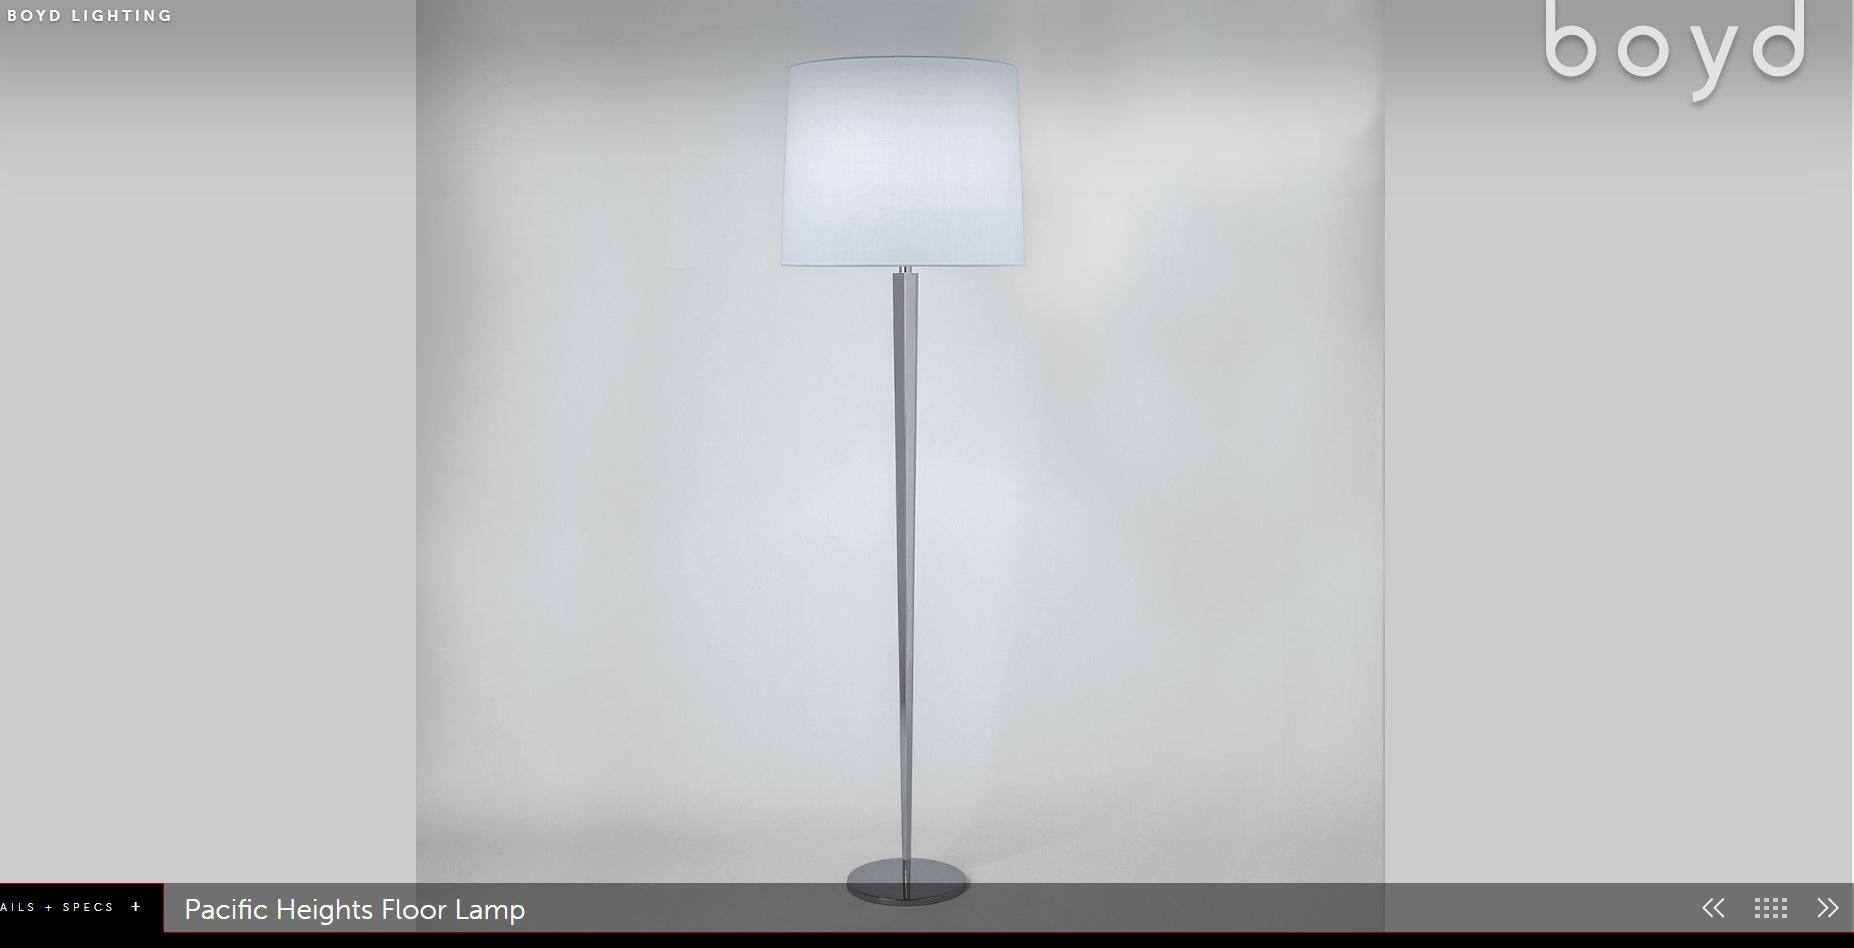 We are delighted to offer for sale this pair of RRP £8,800 Boyd Lighting Pacific heights floor lamps designed by Barbara Barry

An absolutely sublime pair of high contemporary designer floor lamps Designed by the genius that is Barbara Barry and